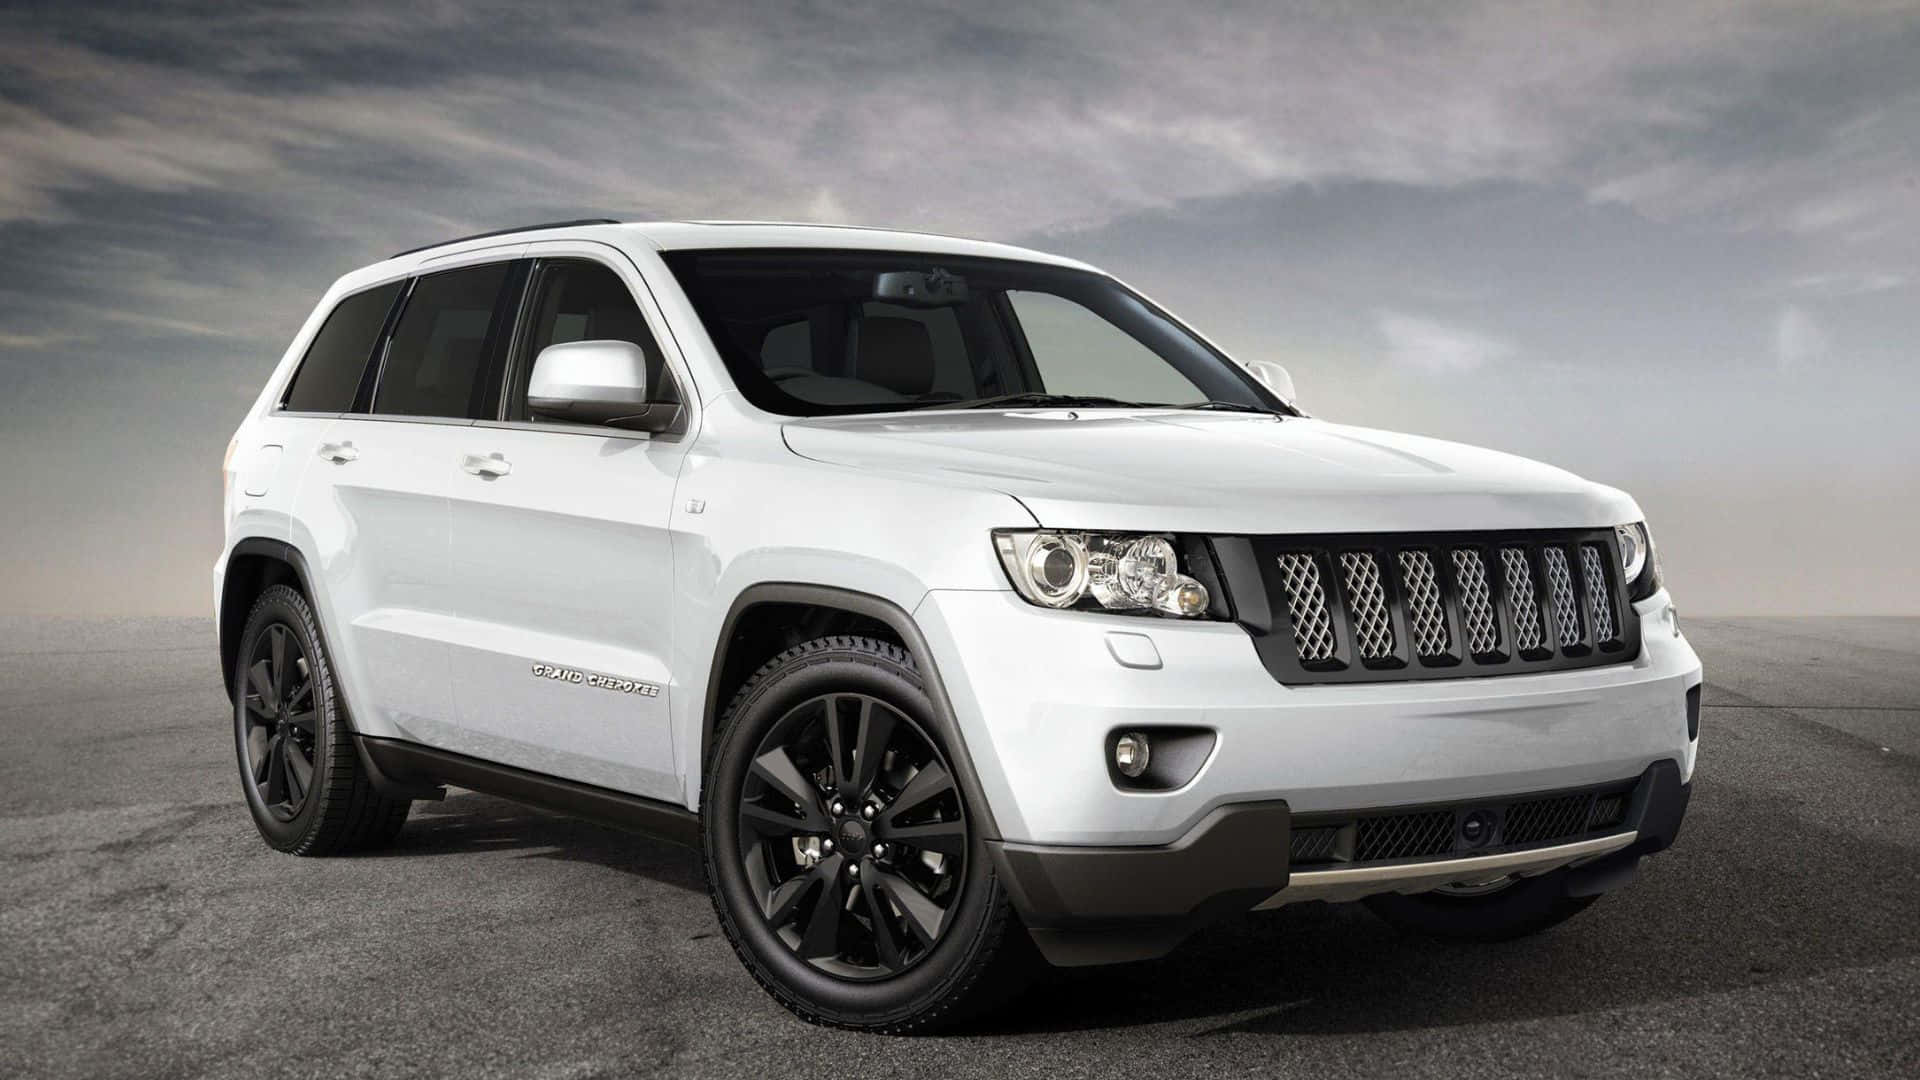 Caption: Refined Ruggedness: Jeep Grand Cherokee In Wilderness Wallpaper